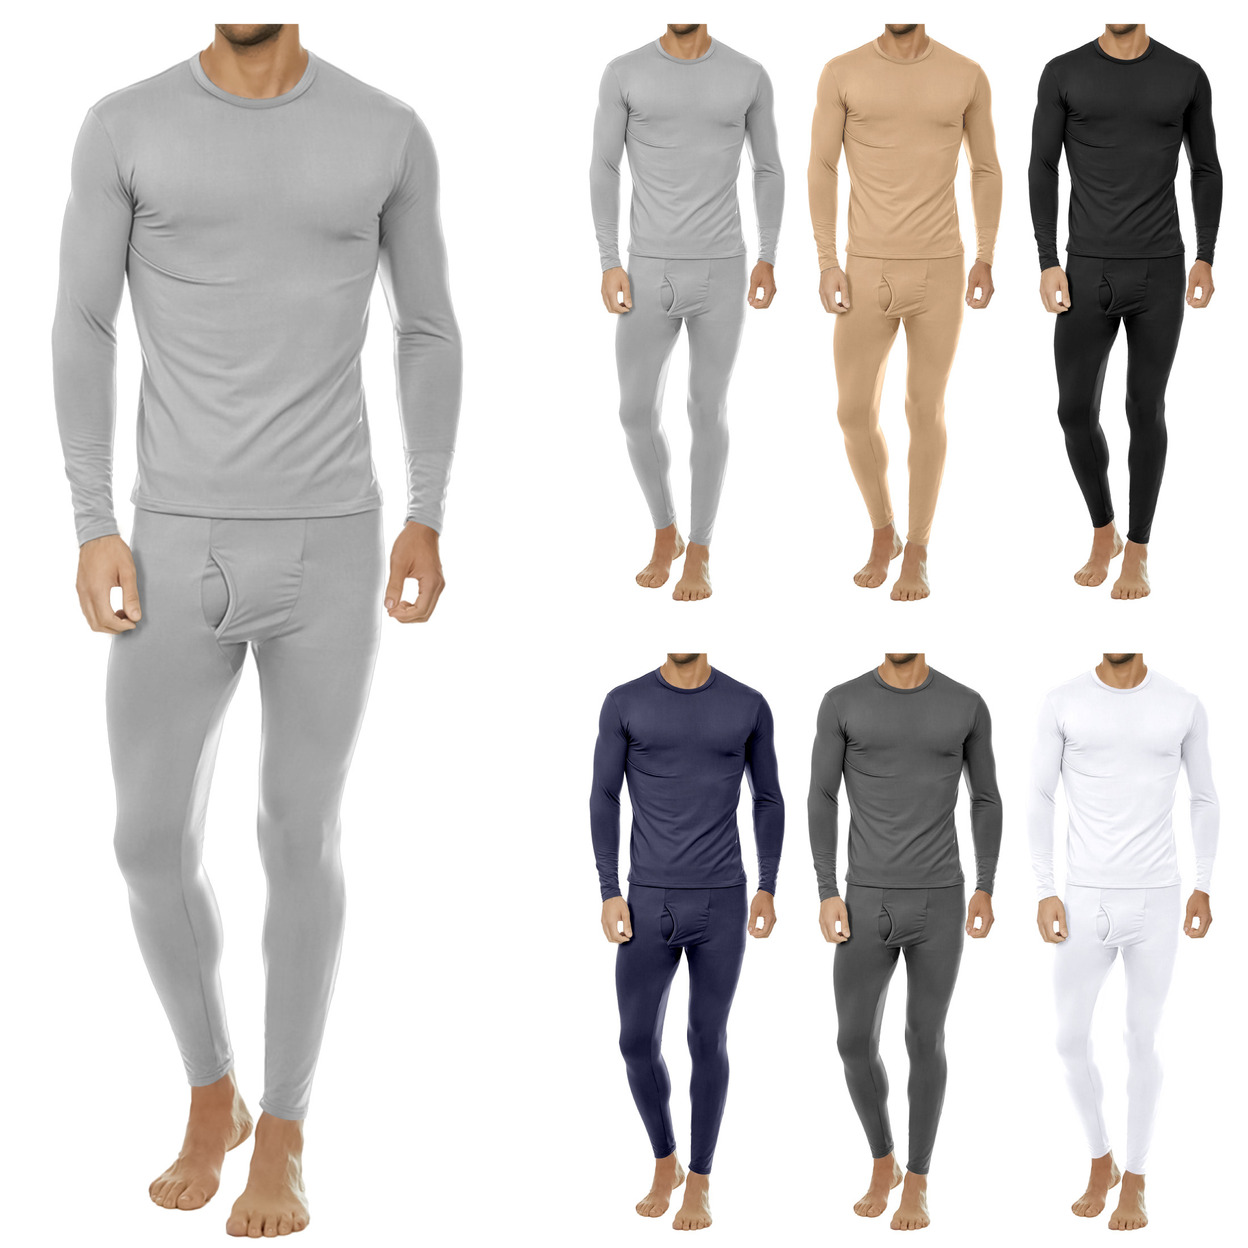 3-Sets: Men's Winter Warm Fleece Lined Thermal Underwear Set For Cold Weather - X-large